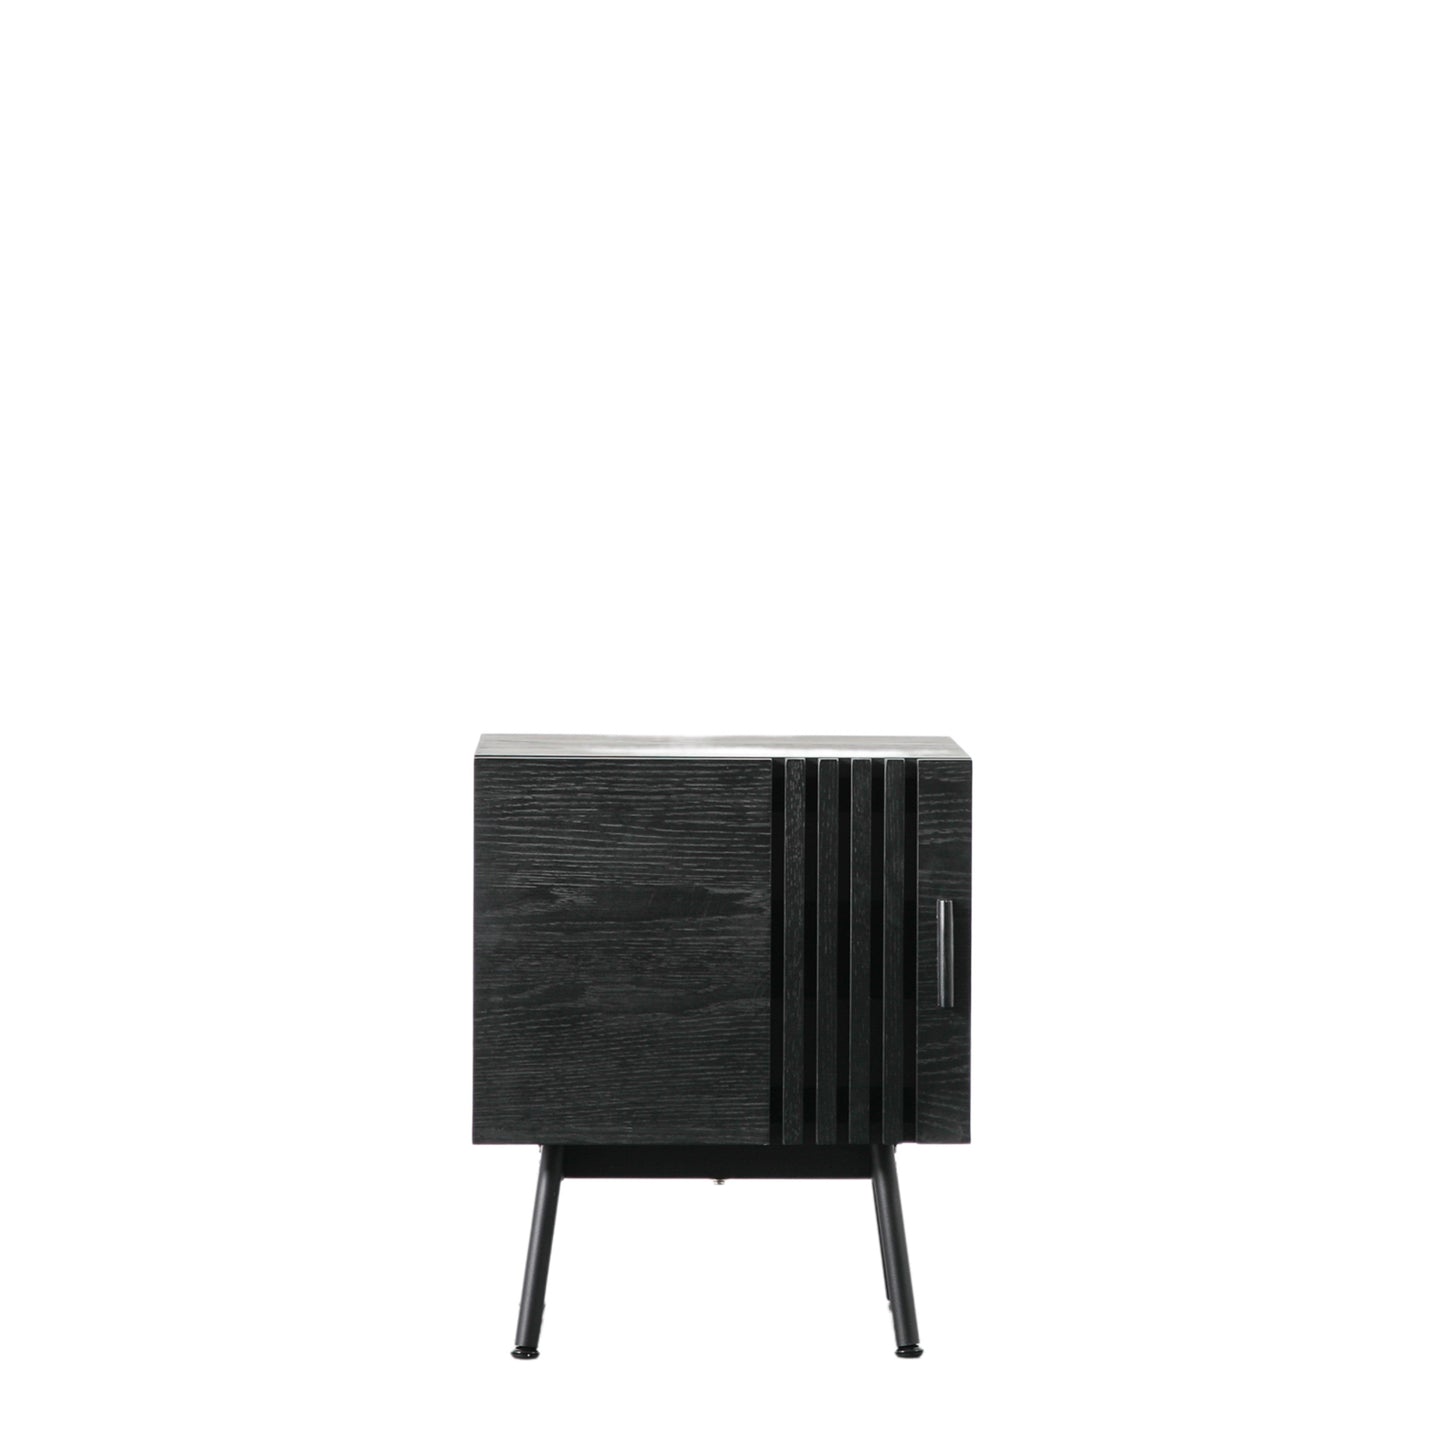 A Holston Side Table Black with a metal base for interior decor and home furniture from Kikiathome.co.uk.